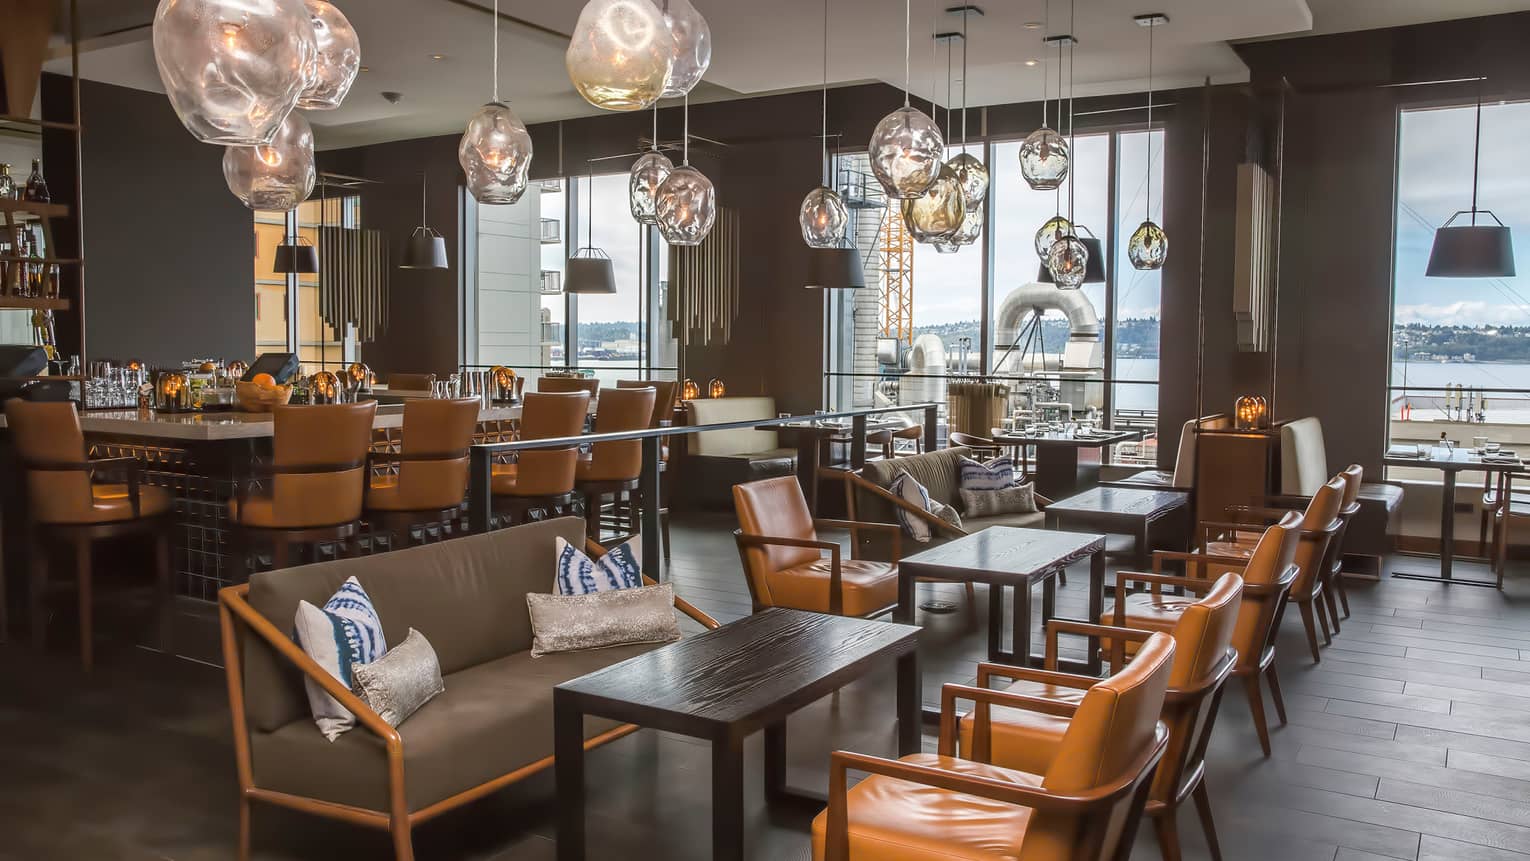 Amber-tinged glass lamps hang above Goldfinch Tavern dining tables, leather chairs